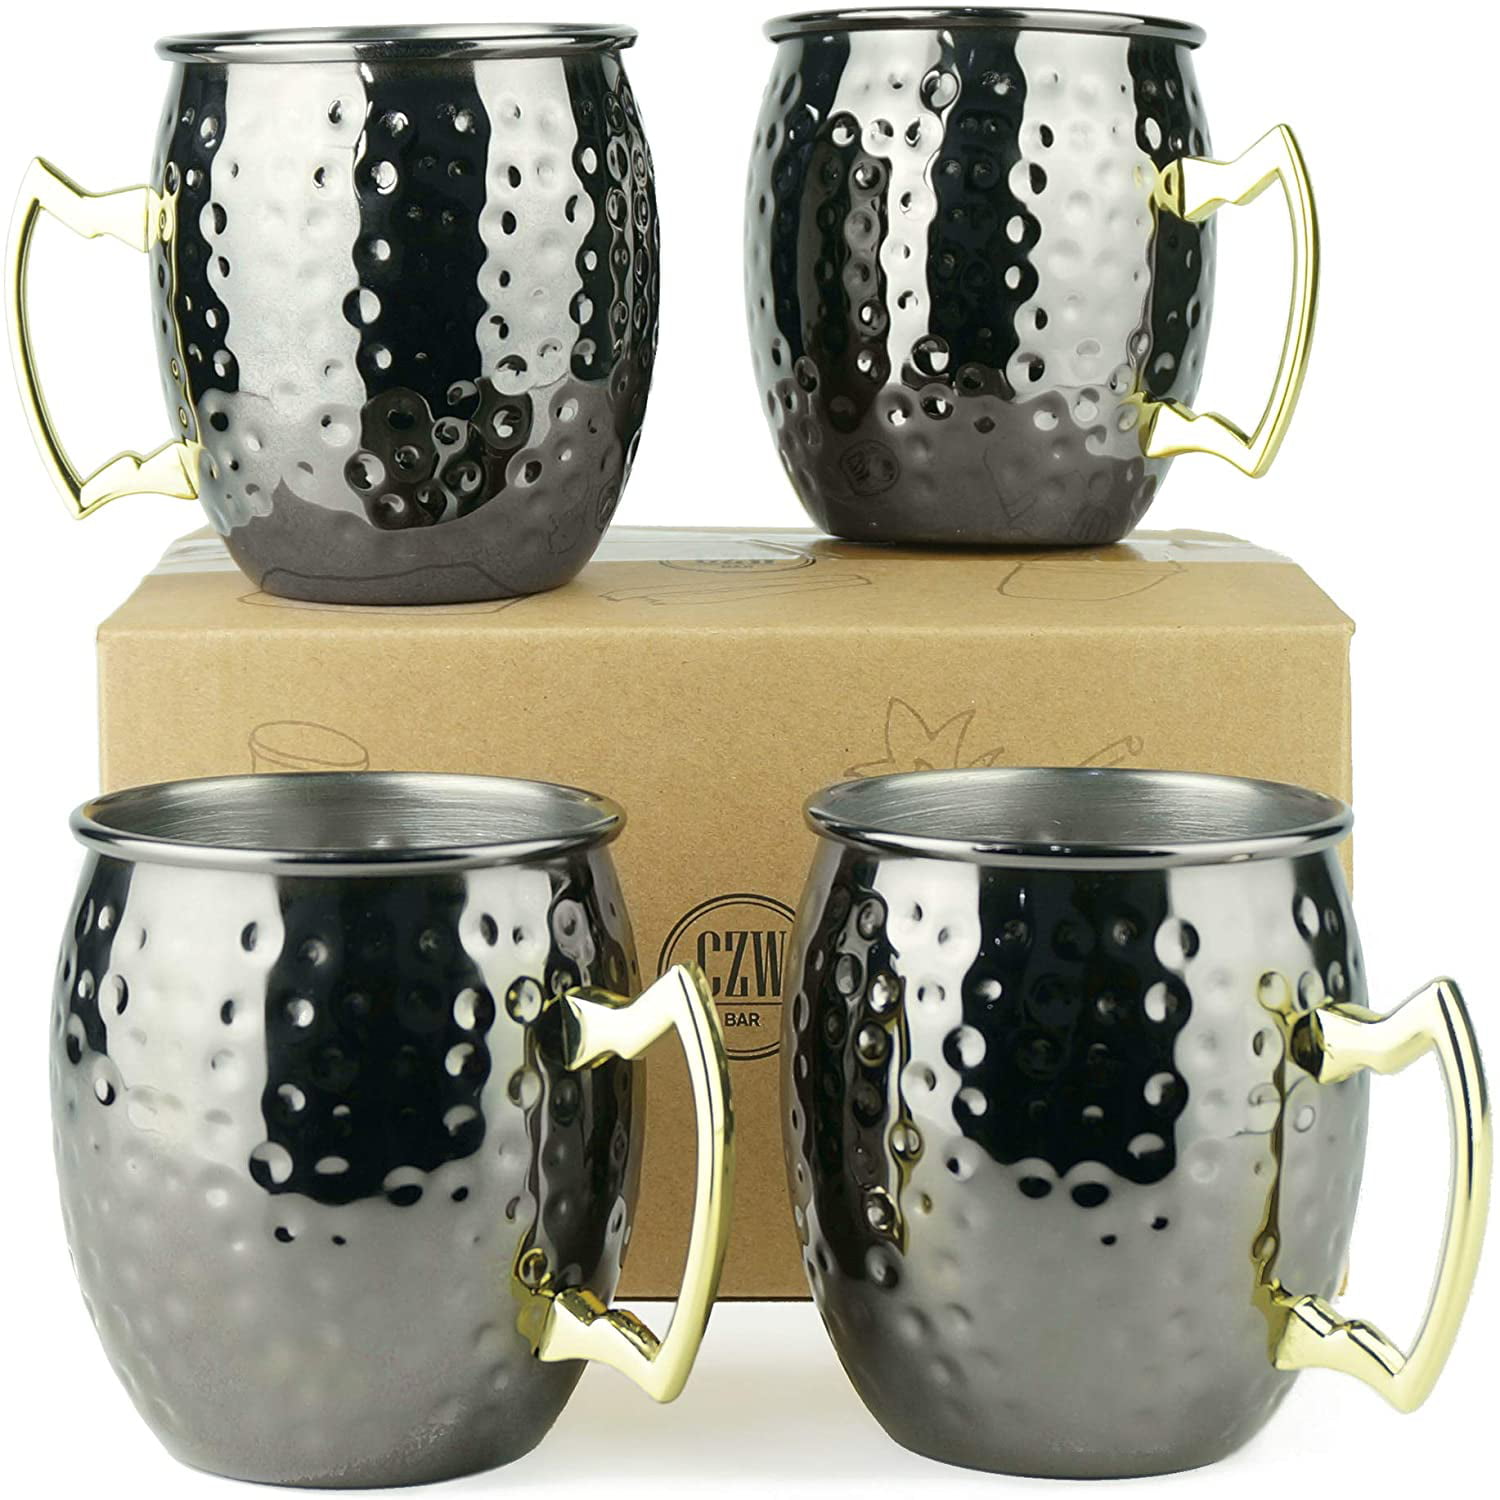 Details about   Pure Copper Moscow Mule Mug Set of 2 Christmas Gifts Barware Vodka Whisky Beer 